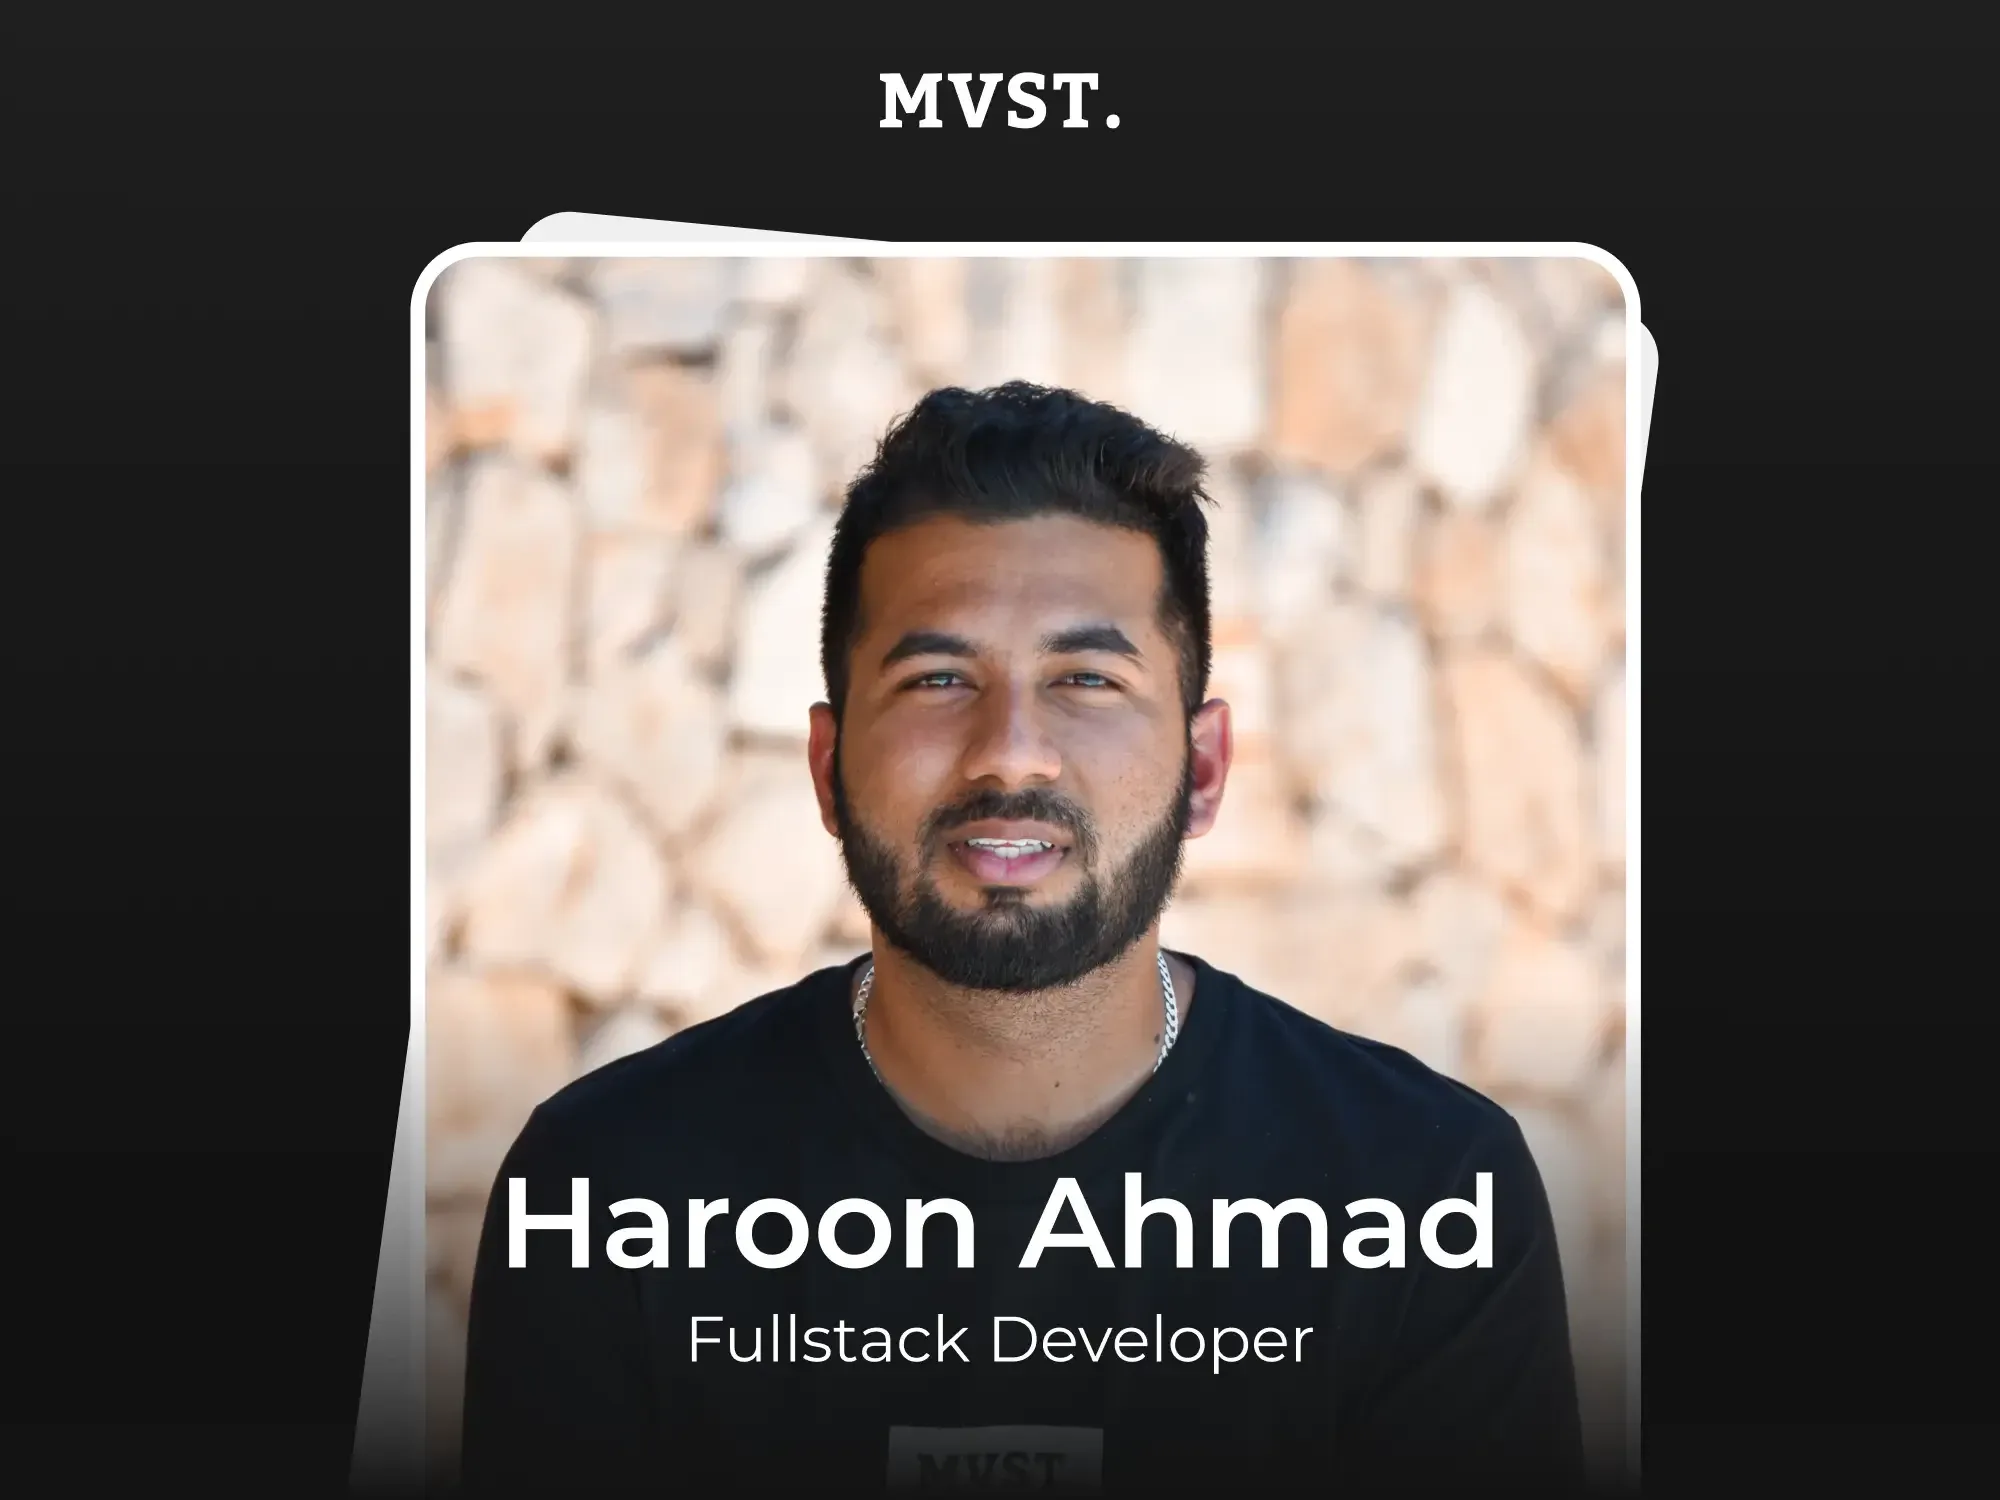 Welcome to MVST, Haroon!